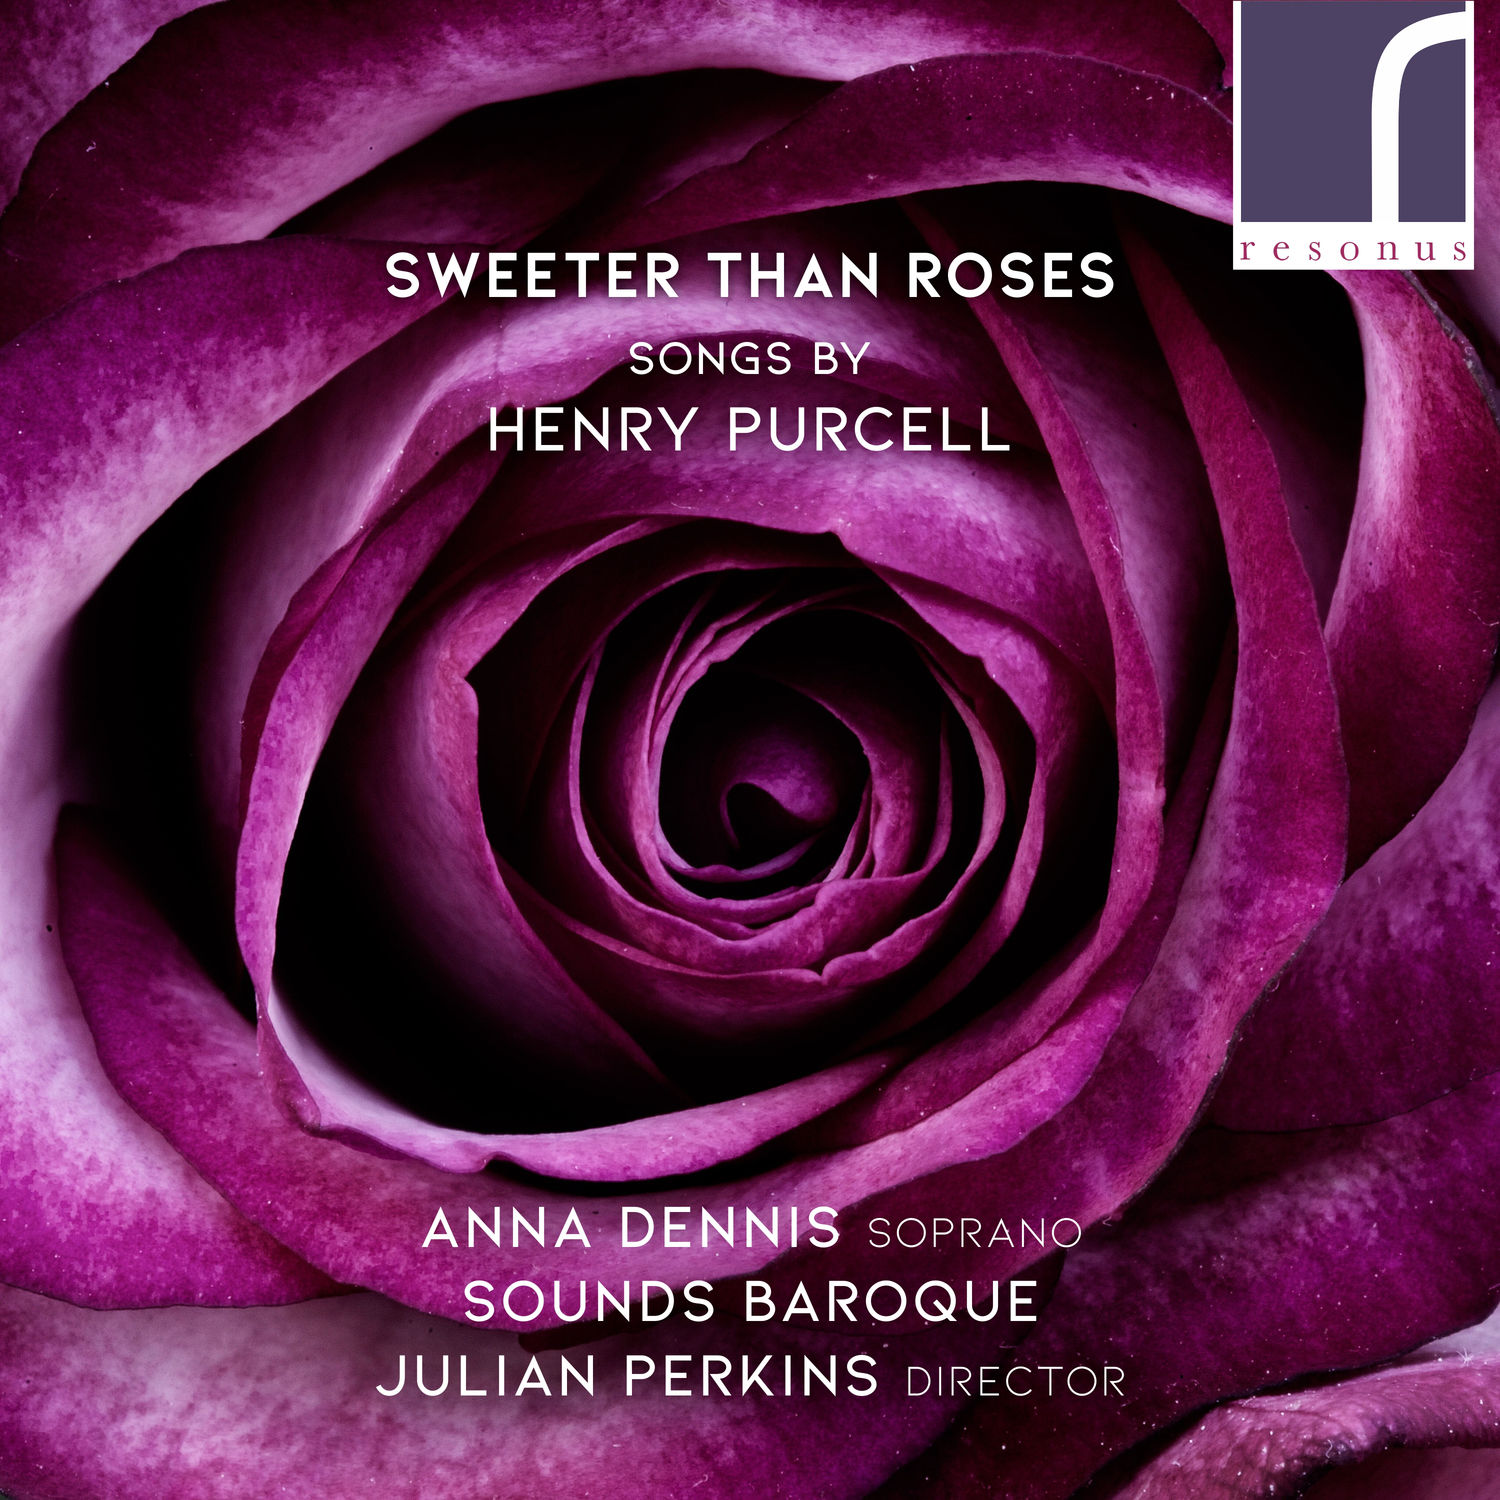 Anna Dennis, Sounds Baroque & Julian Perkins - Sweeter Than Roses: Songs by Henry Purcell (2019) [FLAC 24bit/96kHz]